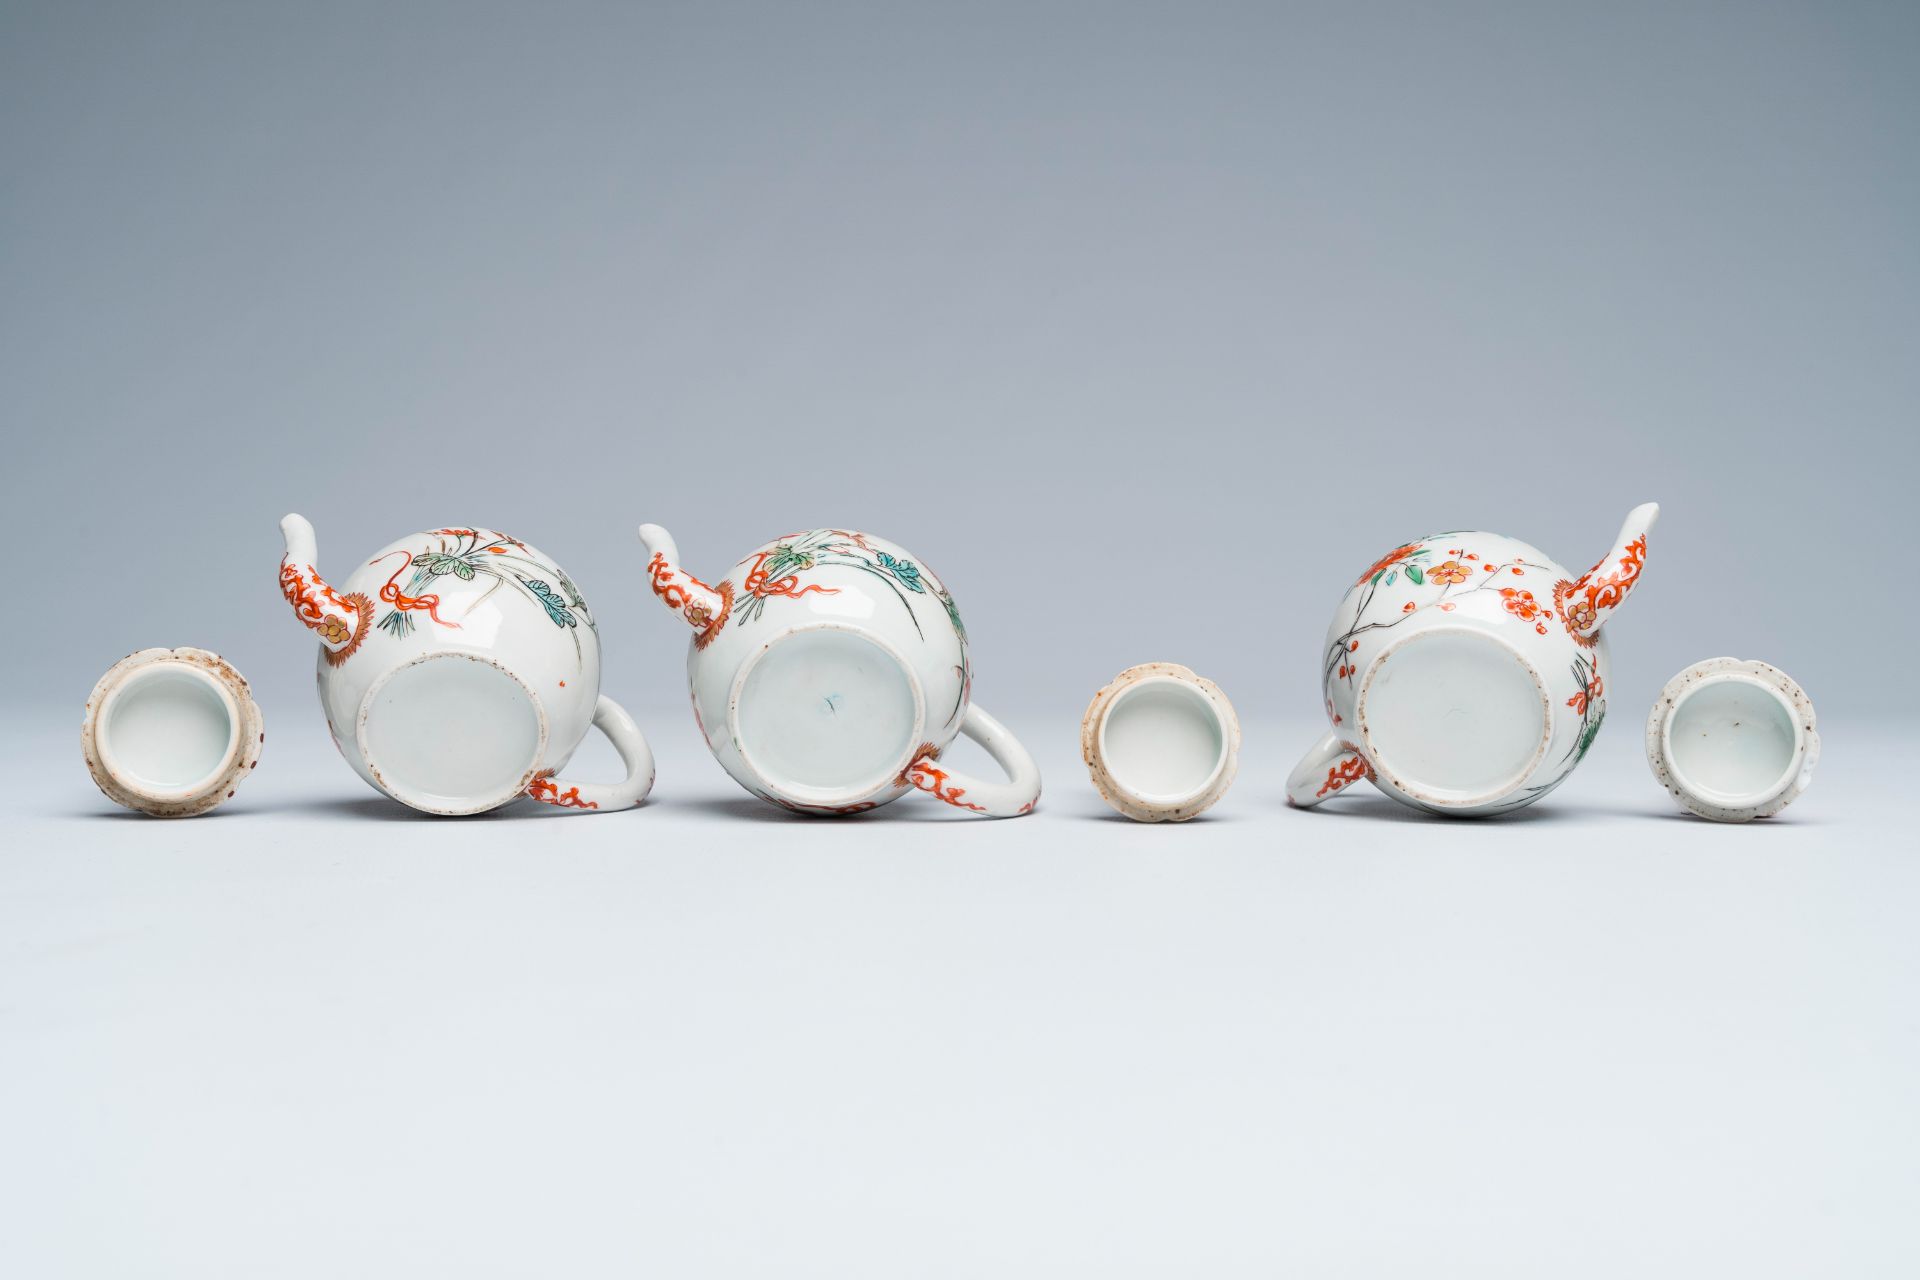 Three Japanese Kakiemon style teapots and covers with floral design, Edo, late 17th C. - Image 7 of 7